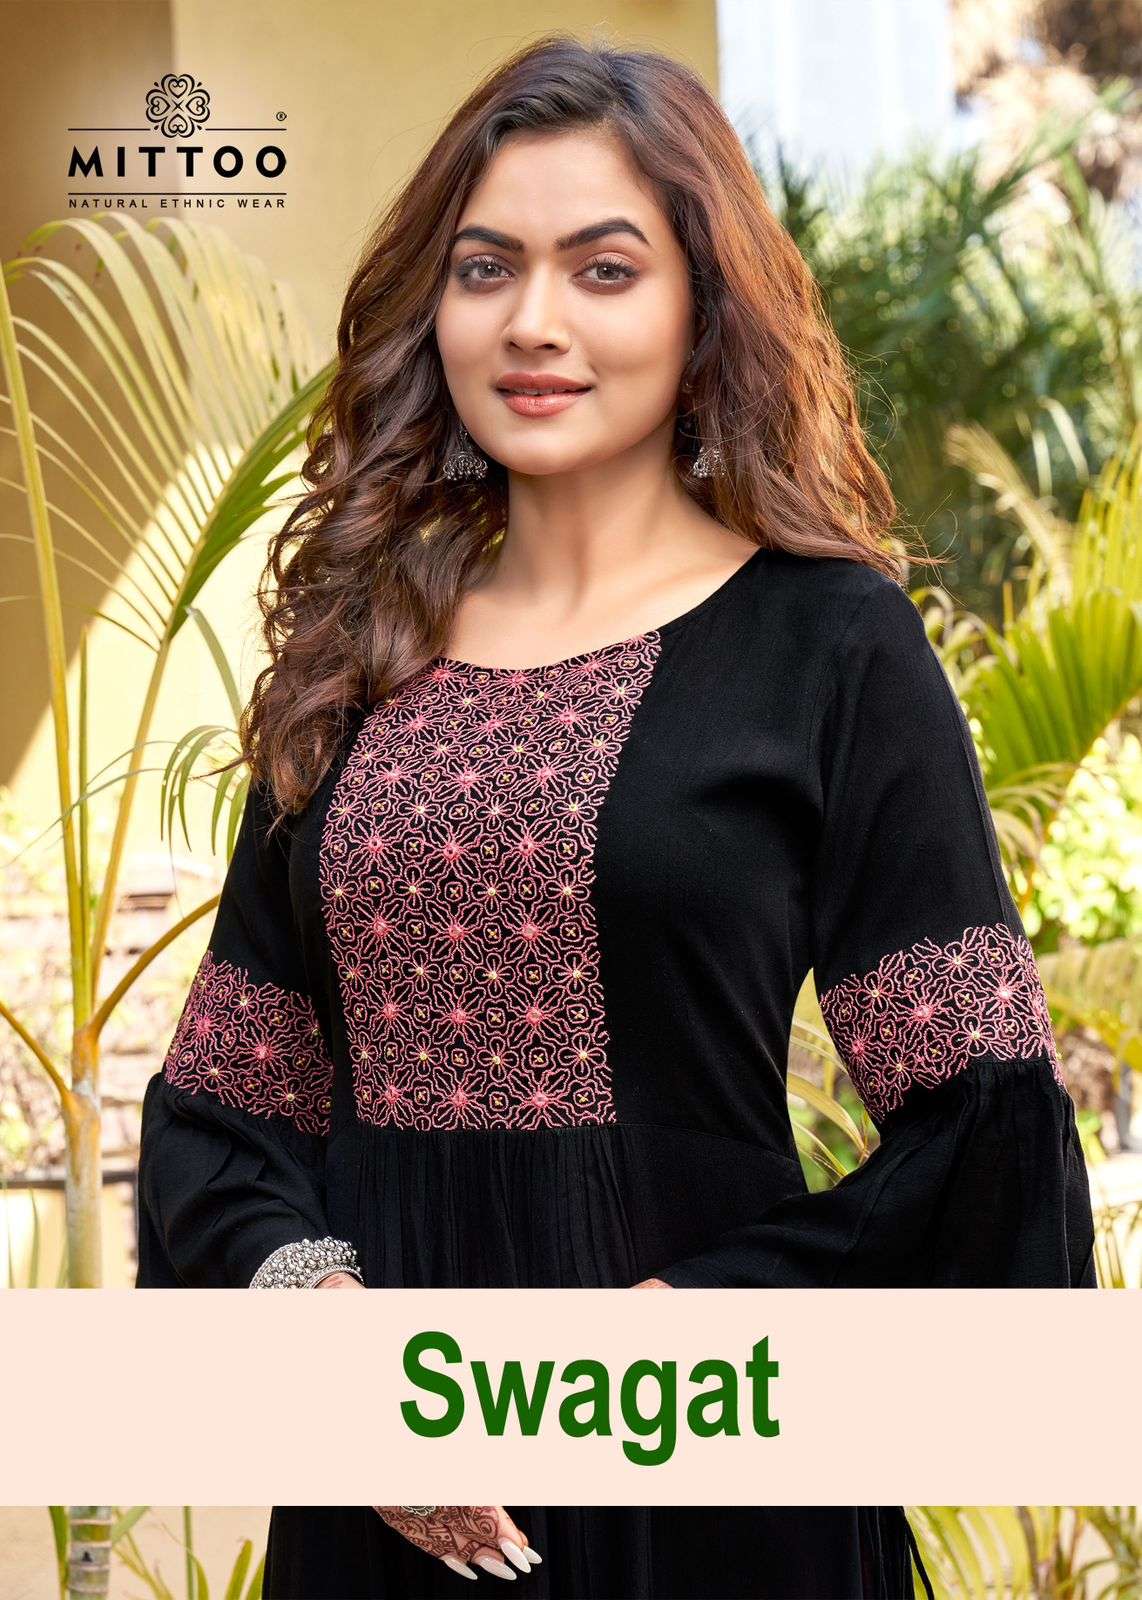 MITTOO SWAGAT NEW HEAVY FANCY DESIGNER RINKLE RAYON HALF INNER KURTI EMBRODIERY WORK FESTIVAL COLLECTION WHOLESALER 